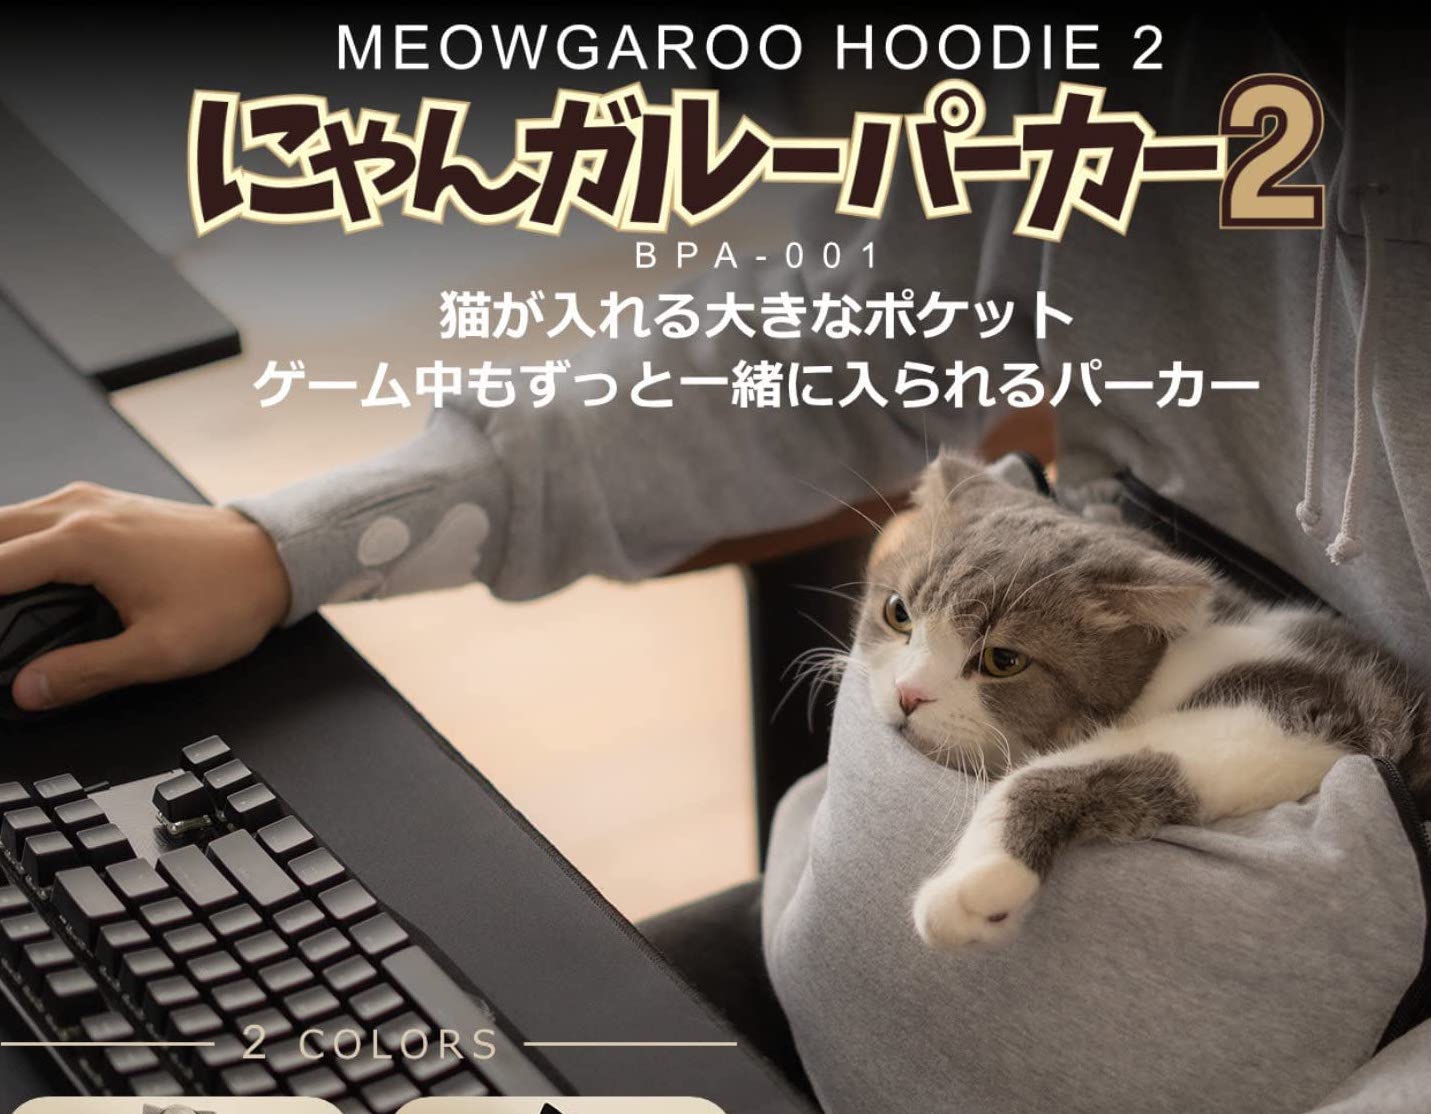 Hoodie with Cat-Holder